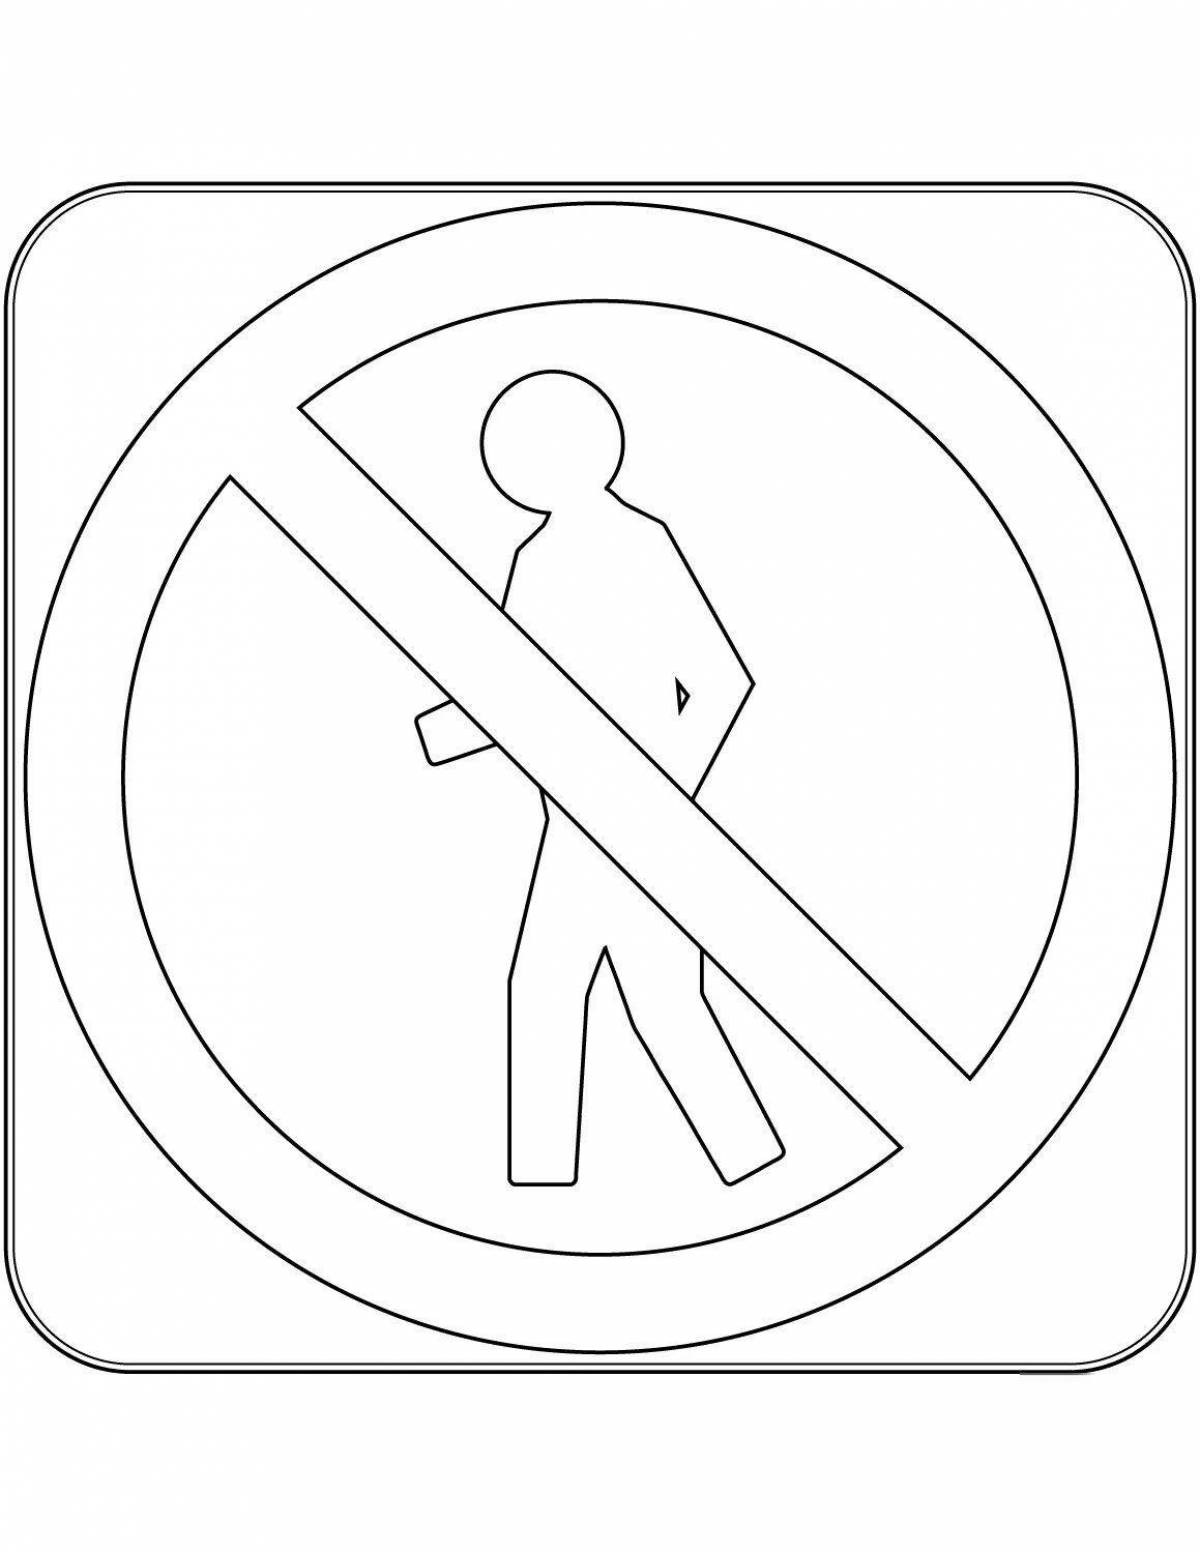 Luminous prohibition signs for babies